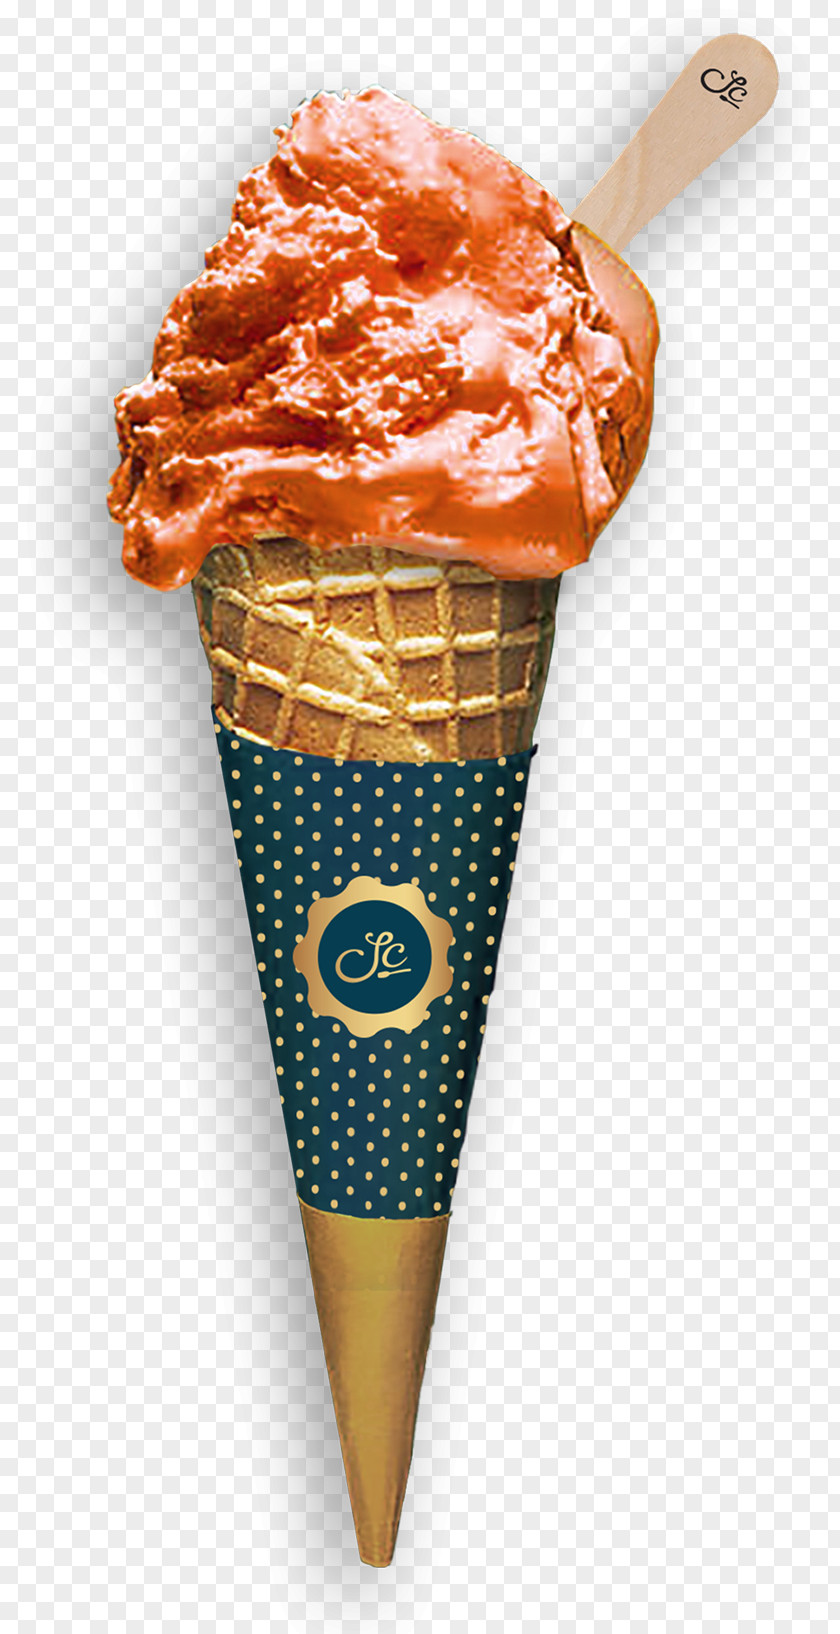 Ice Cream Southern Charm Gelato Shoppe Chocolate Cones PNG